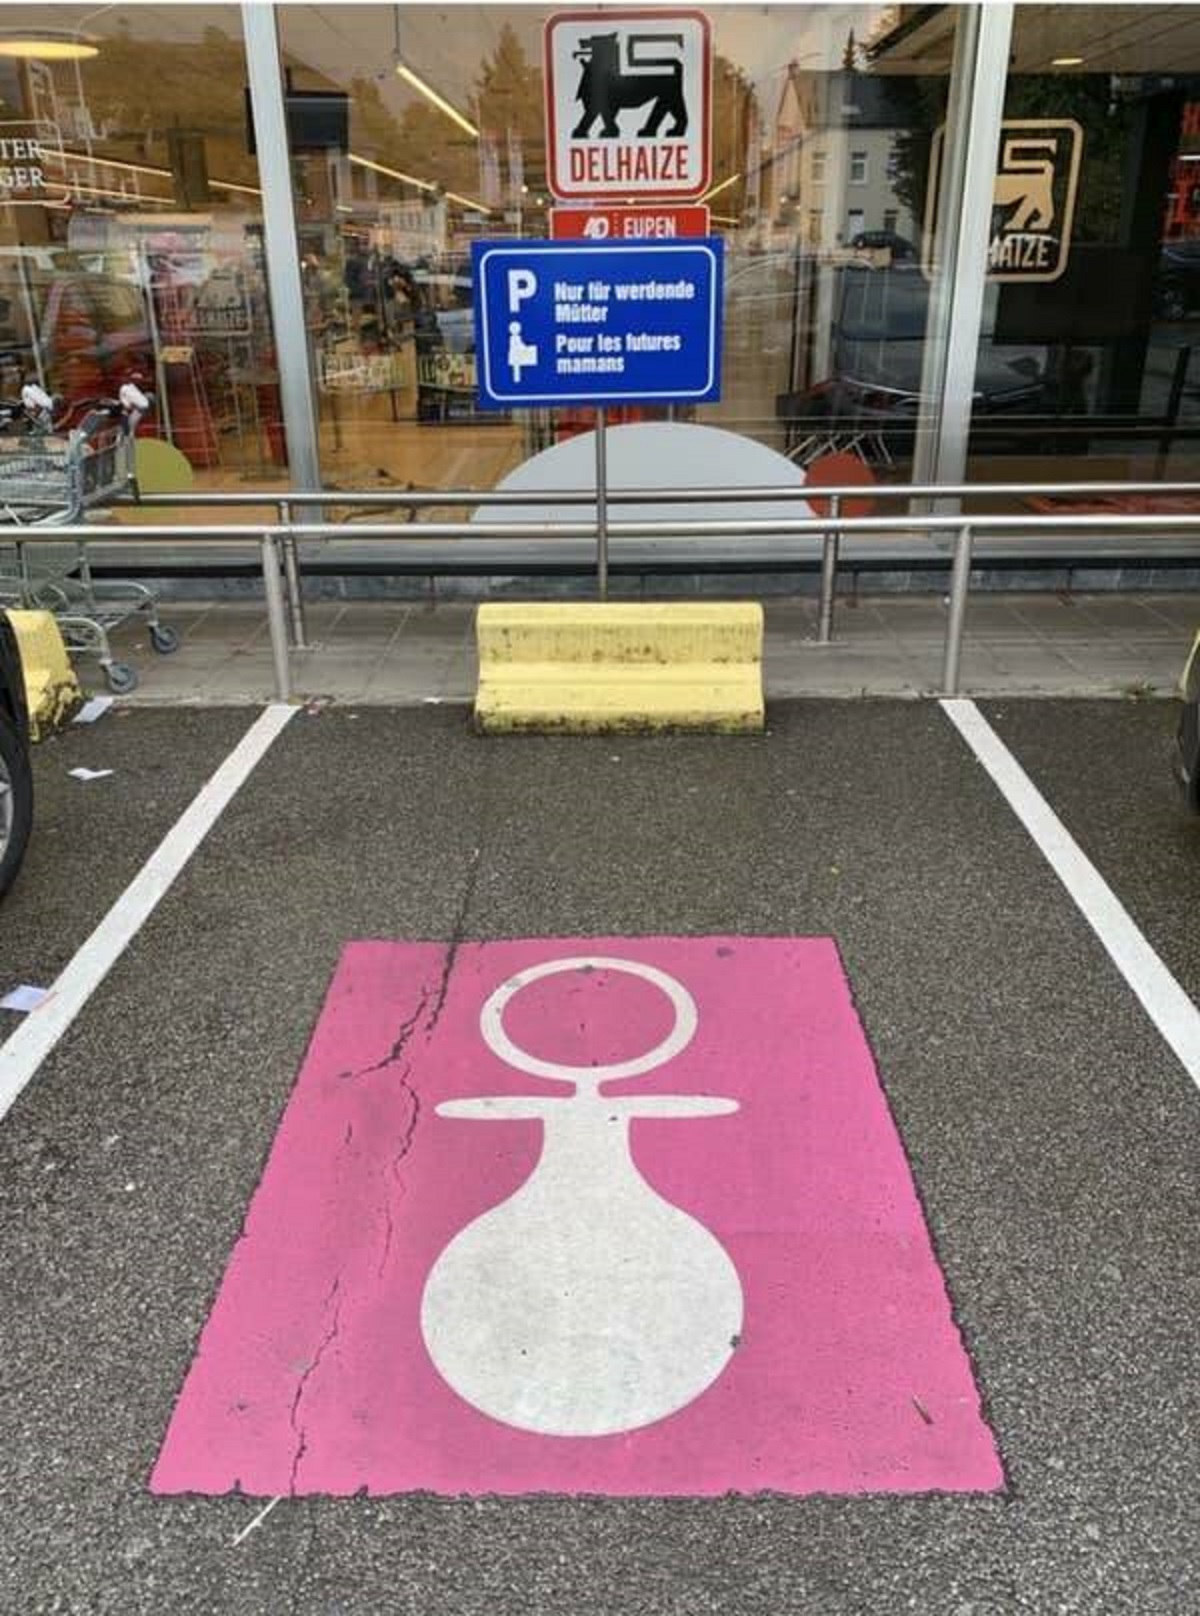 Belgian supermarkets have special parking spots close to the store just for pregnant women.